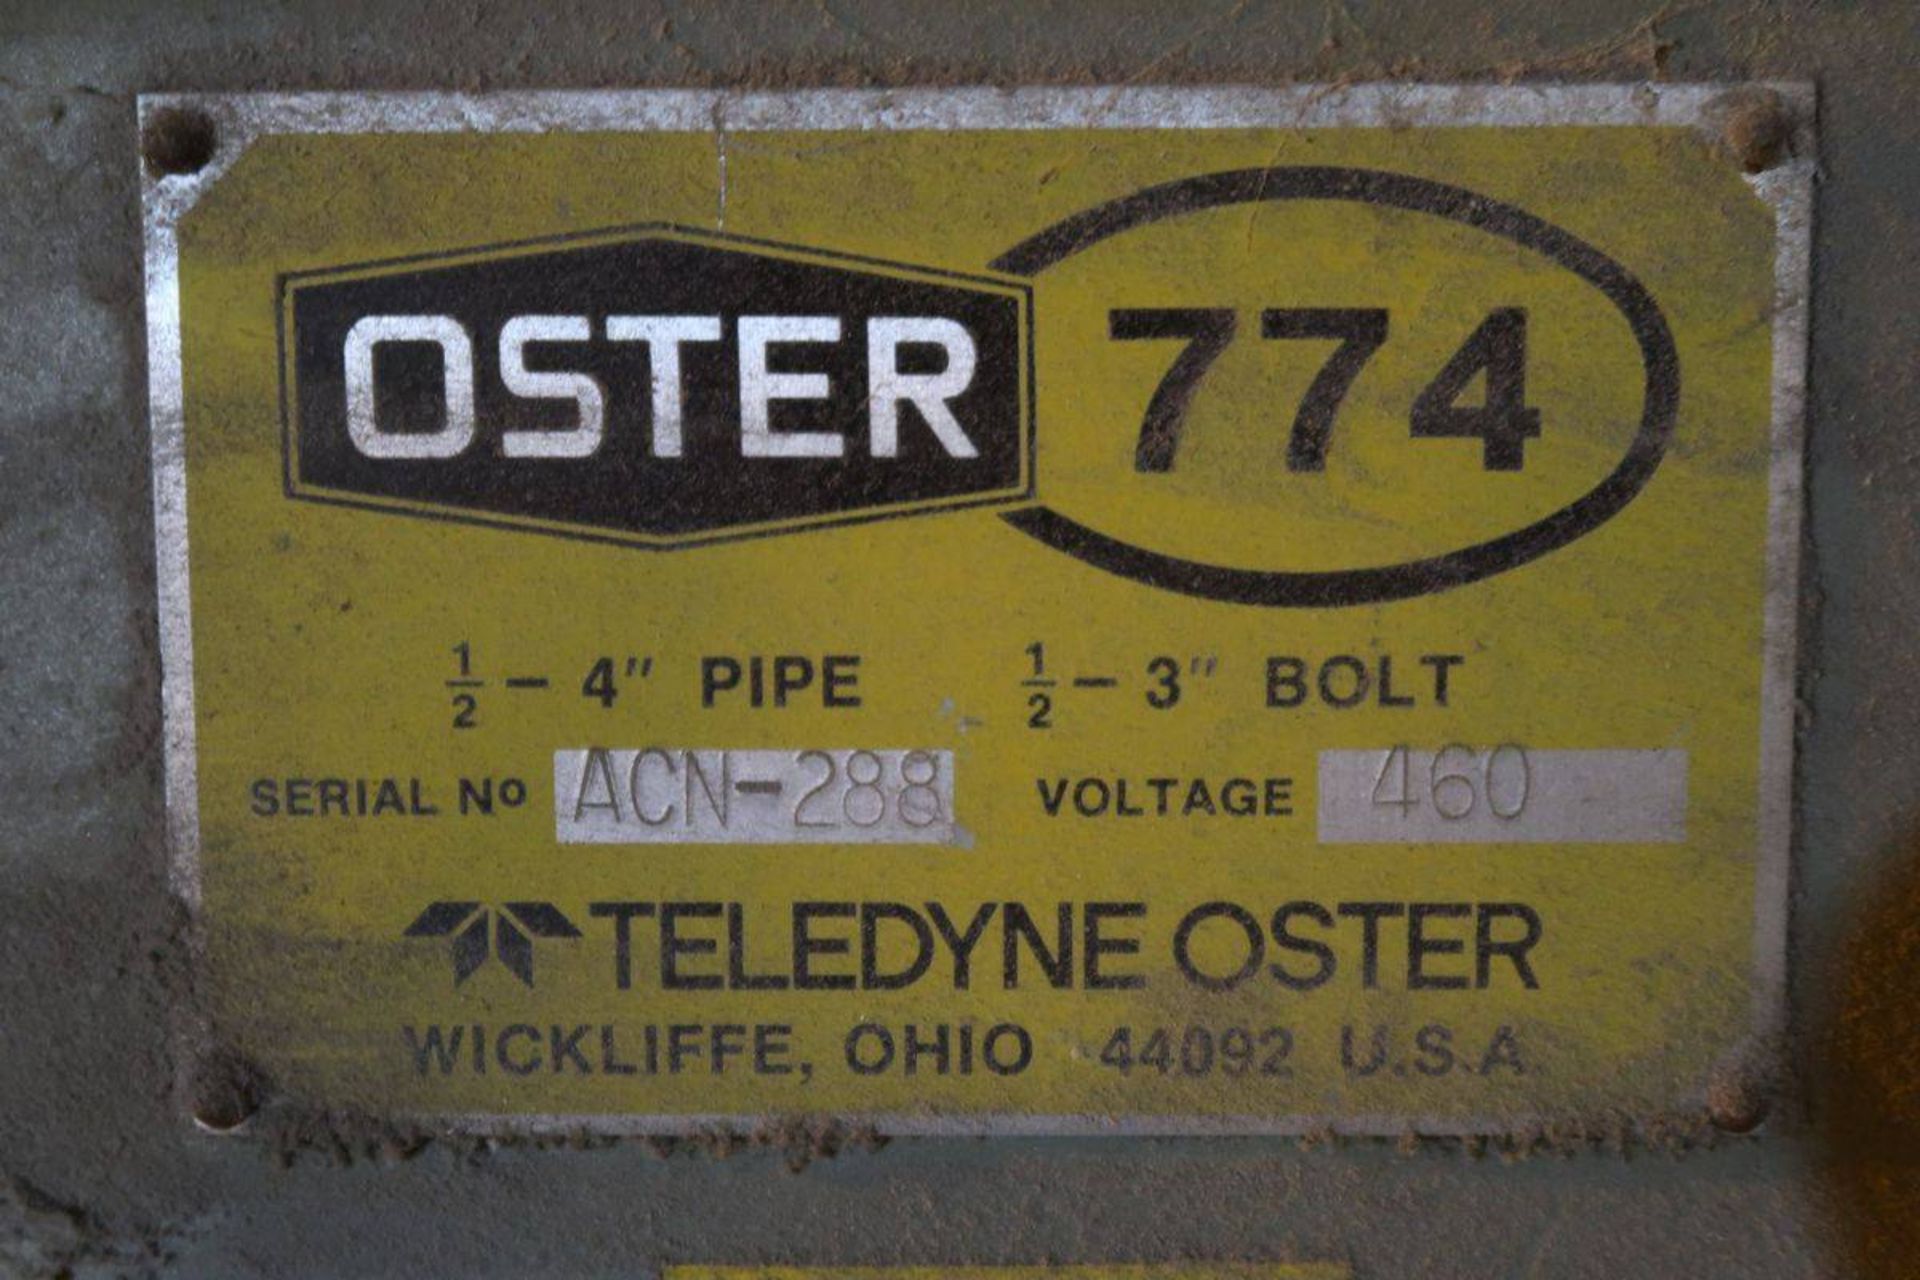 Teledyne Oster 774 Pipe Threading Machine - Image 5 of 5